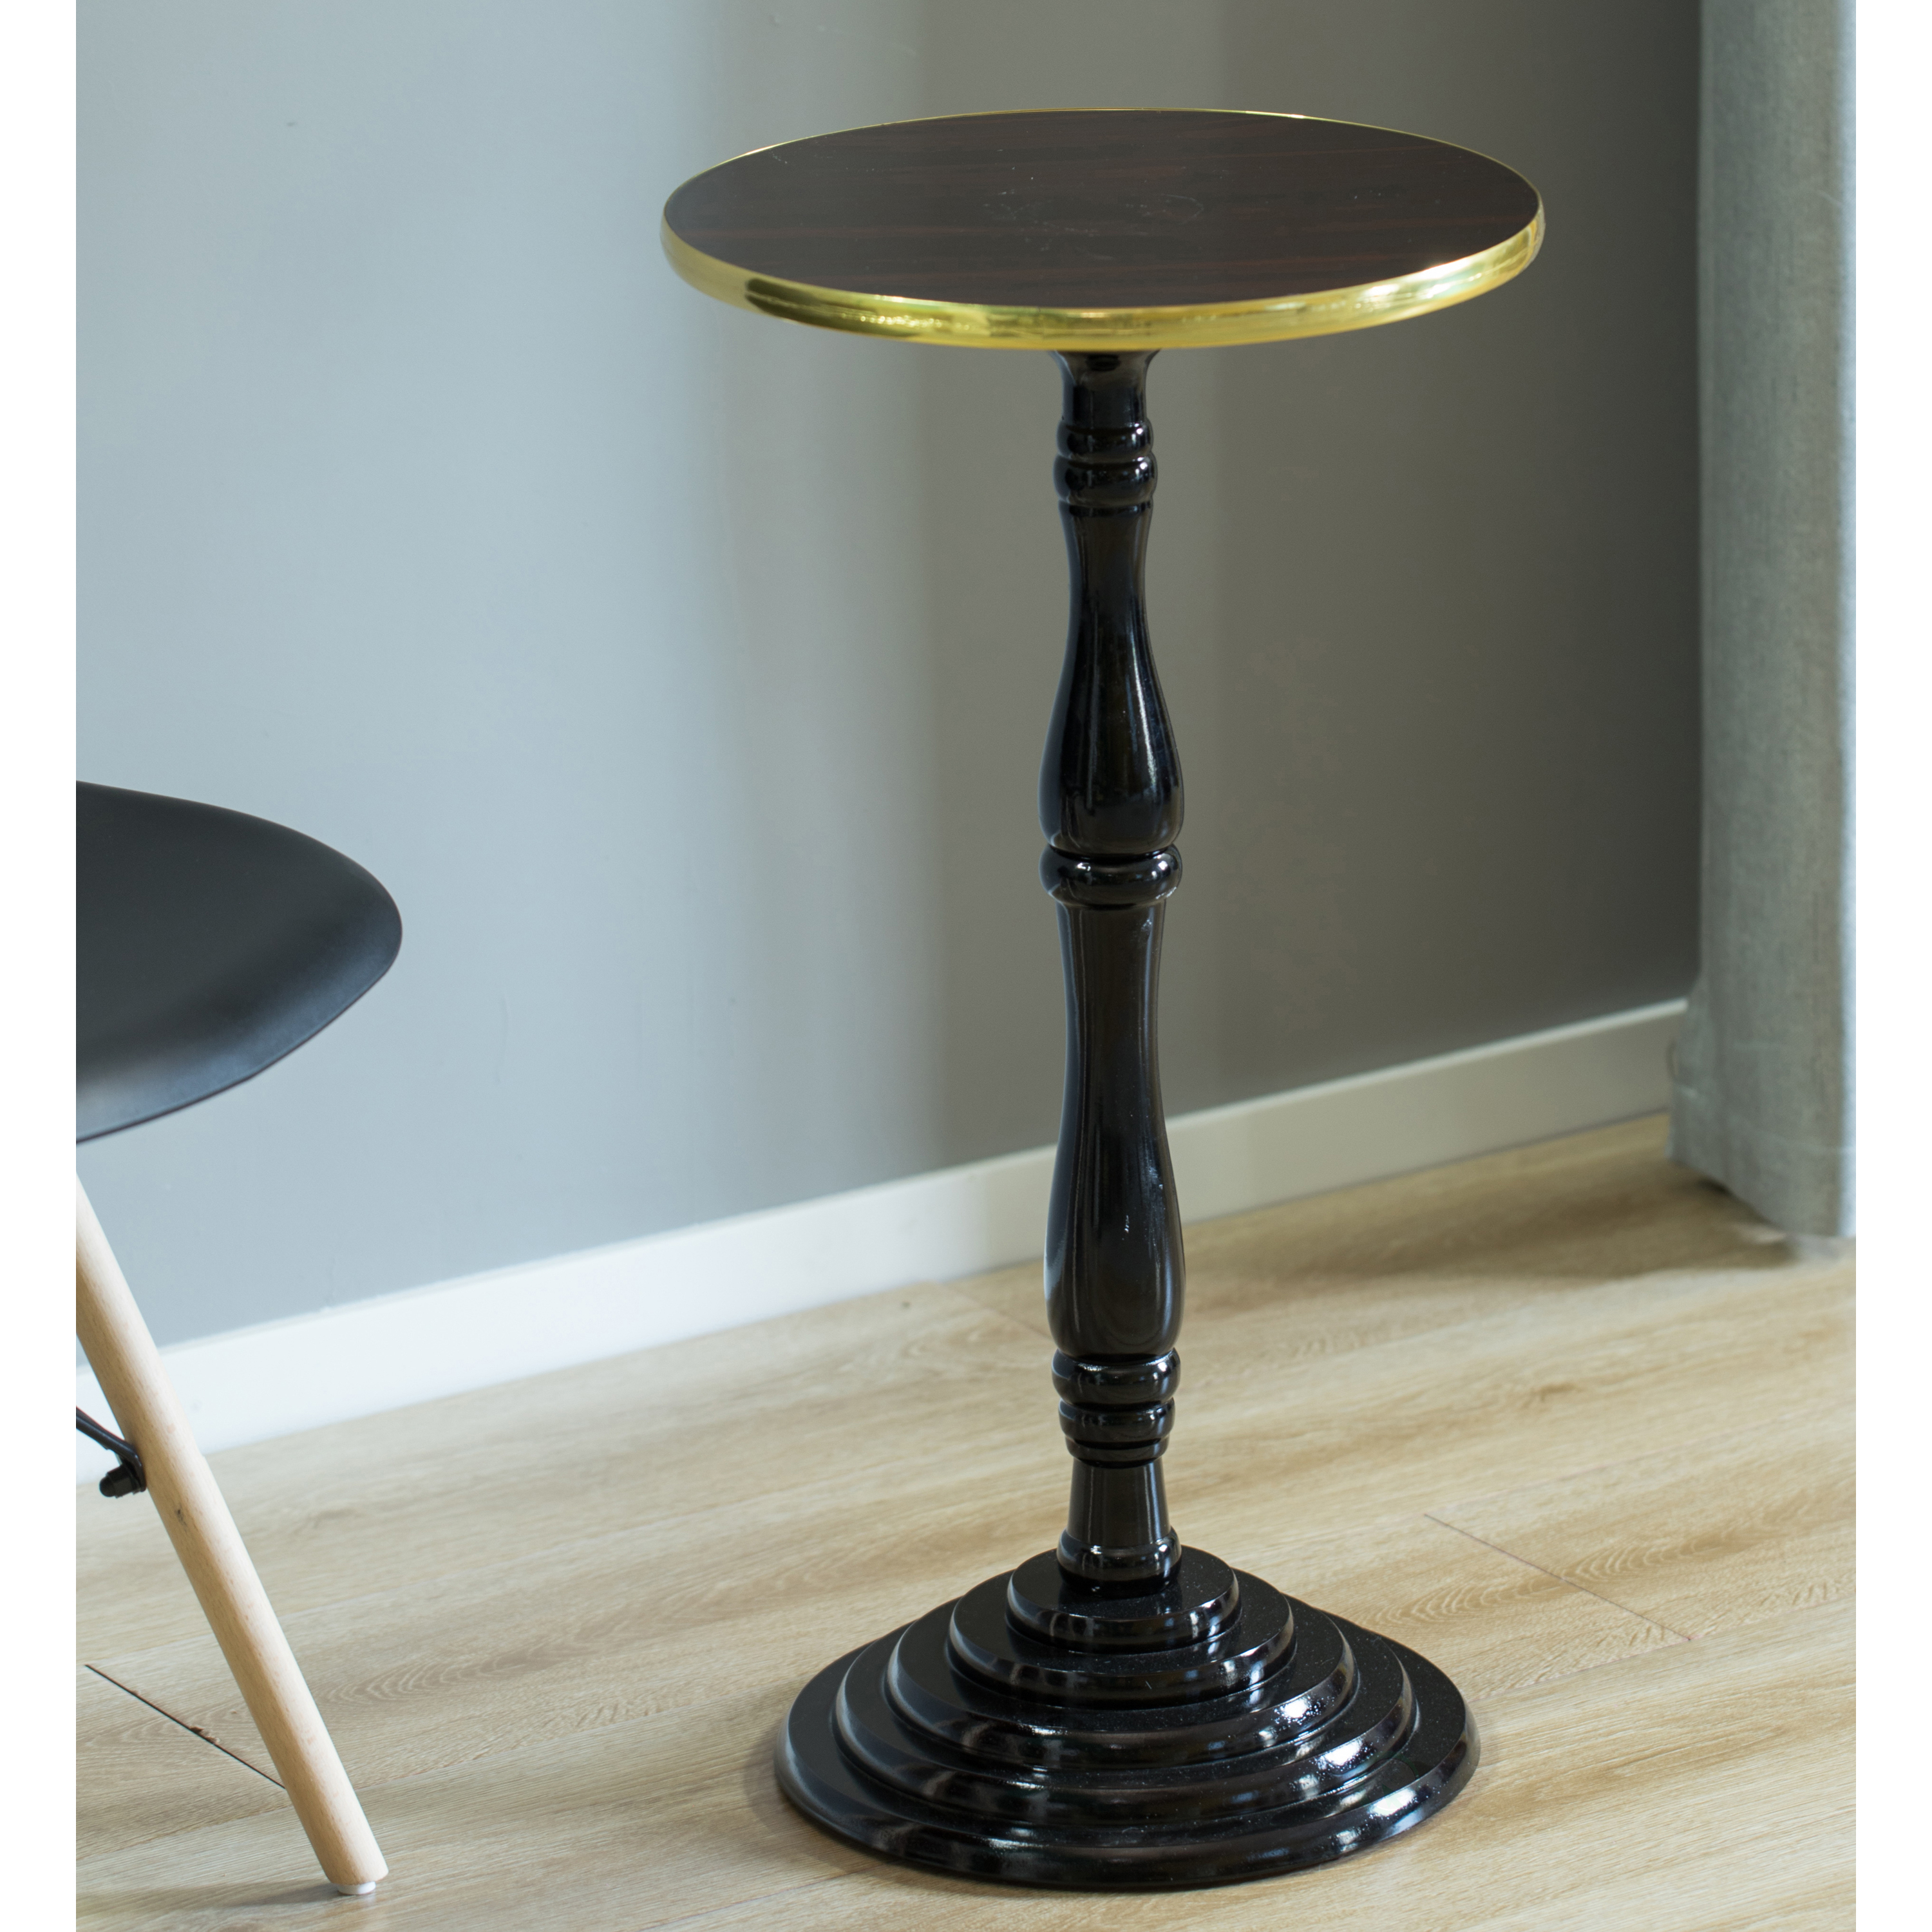 Round Wooden Side Table, Living Room Accent Pedestal End Table - Modern Furniture, Decorative Stand, Small Space Solution, Circular Design -